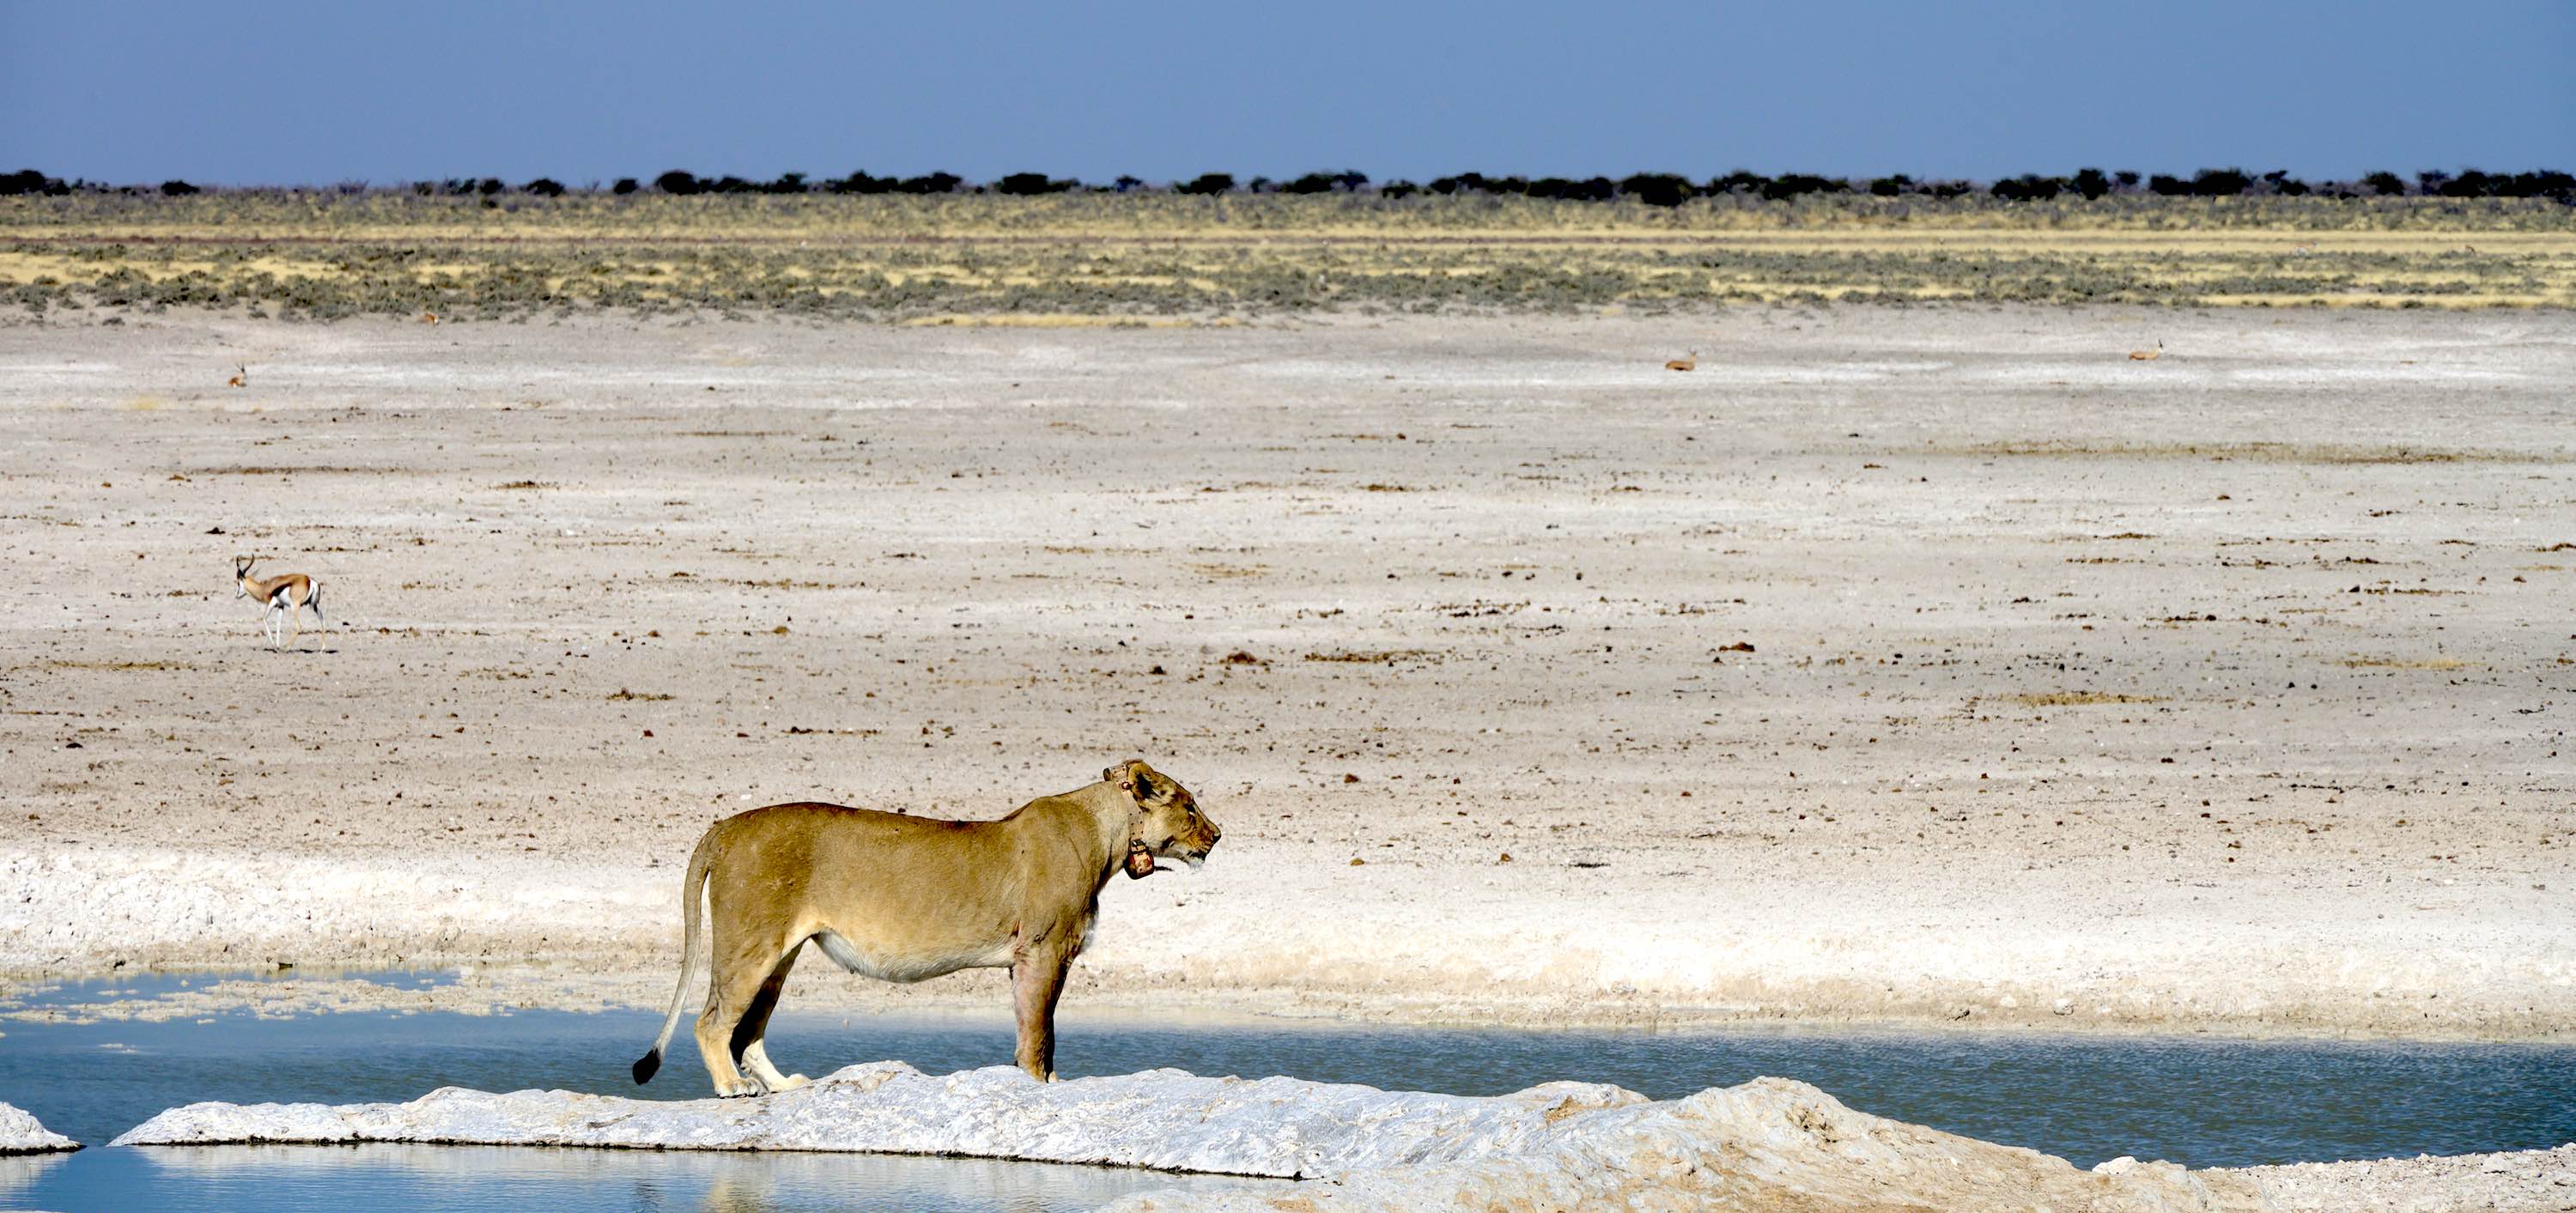 A collared lioness at a waterhole in Etosha.